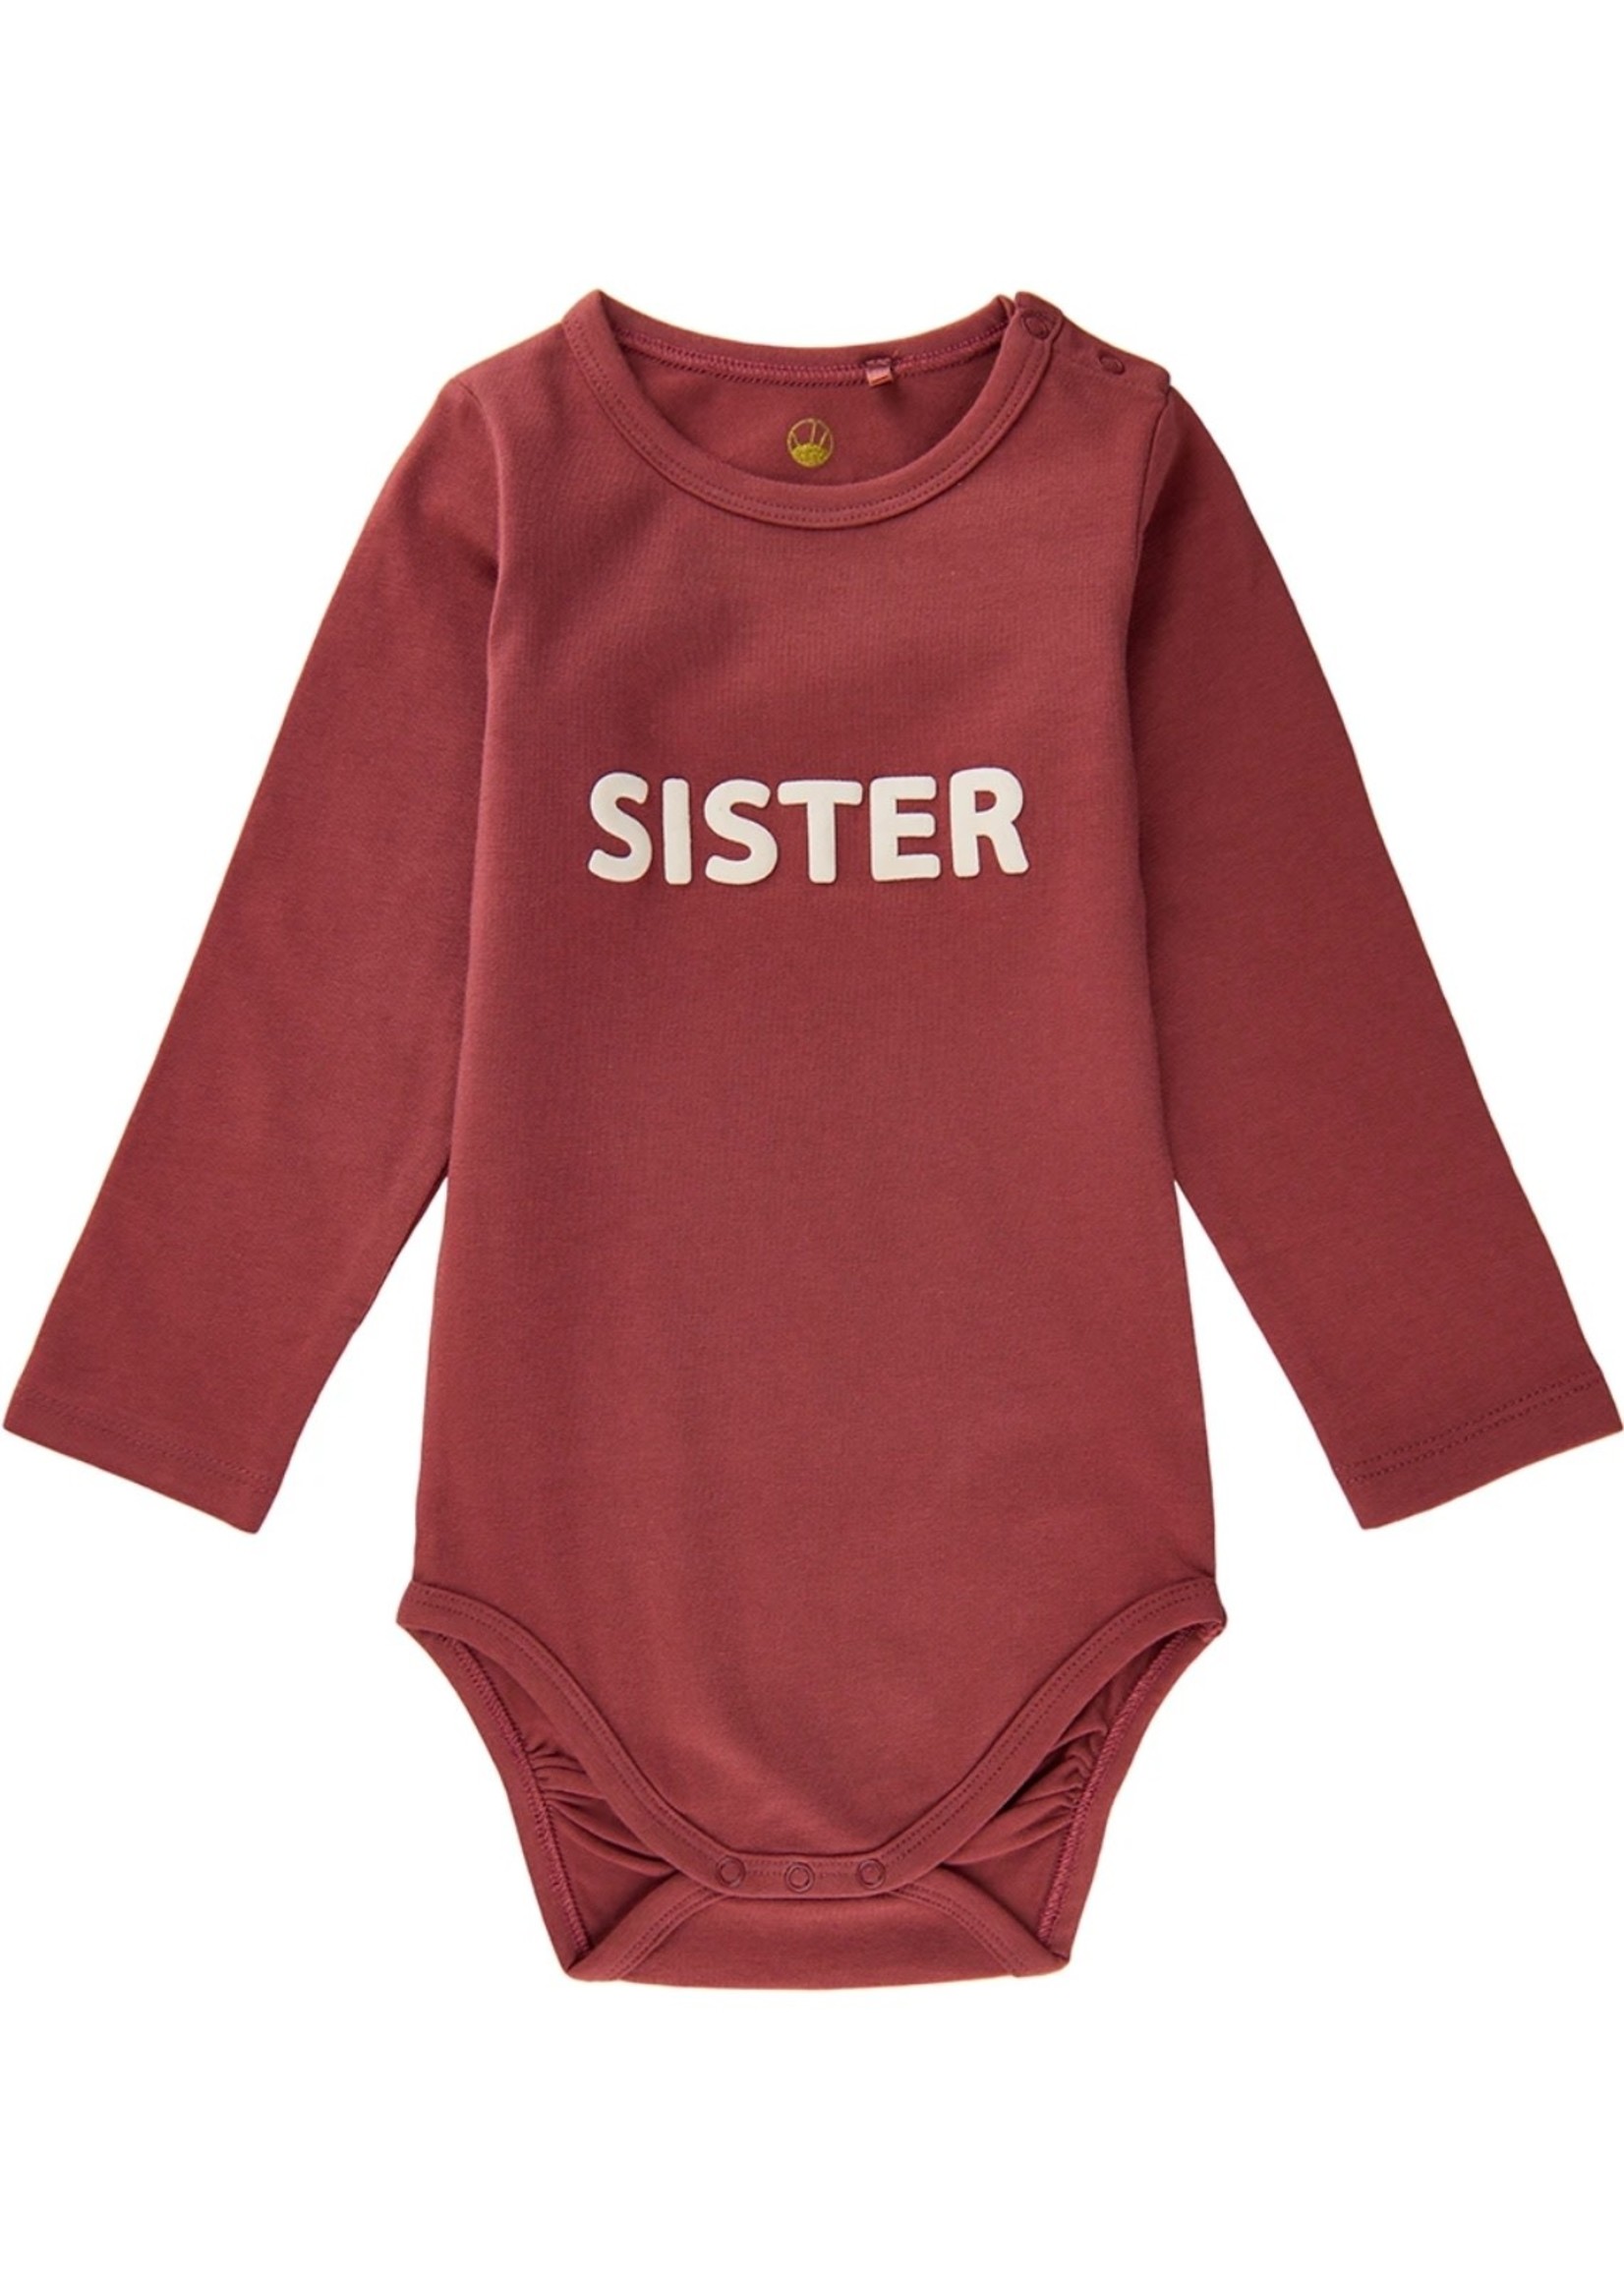 The New The New, Alma Sister Apple Butter Body Suit